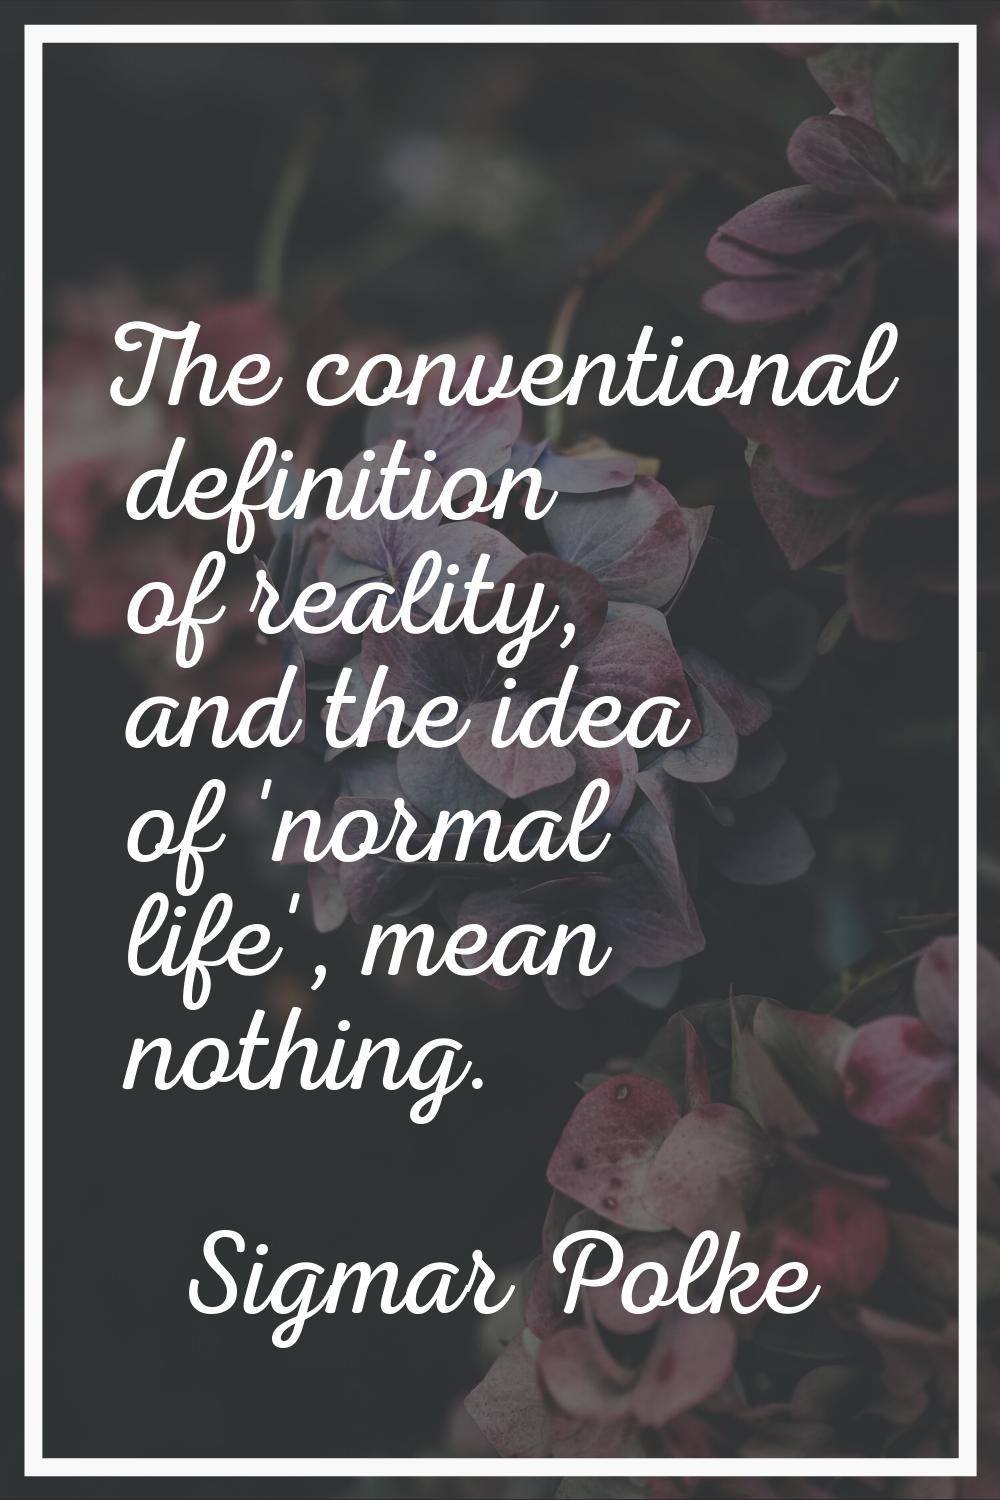 The conventional definition of reality, and the idea of 'normal life', mean nothing.